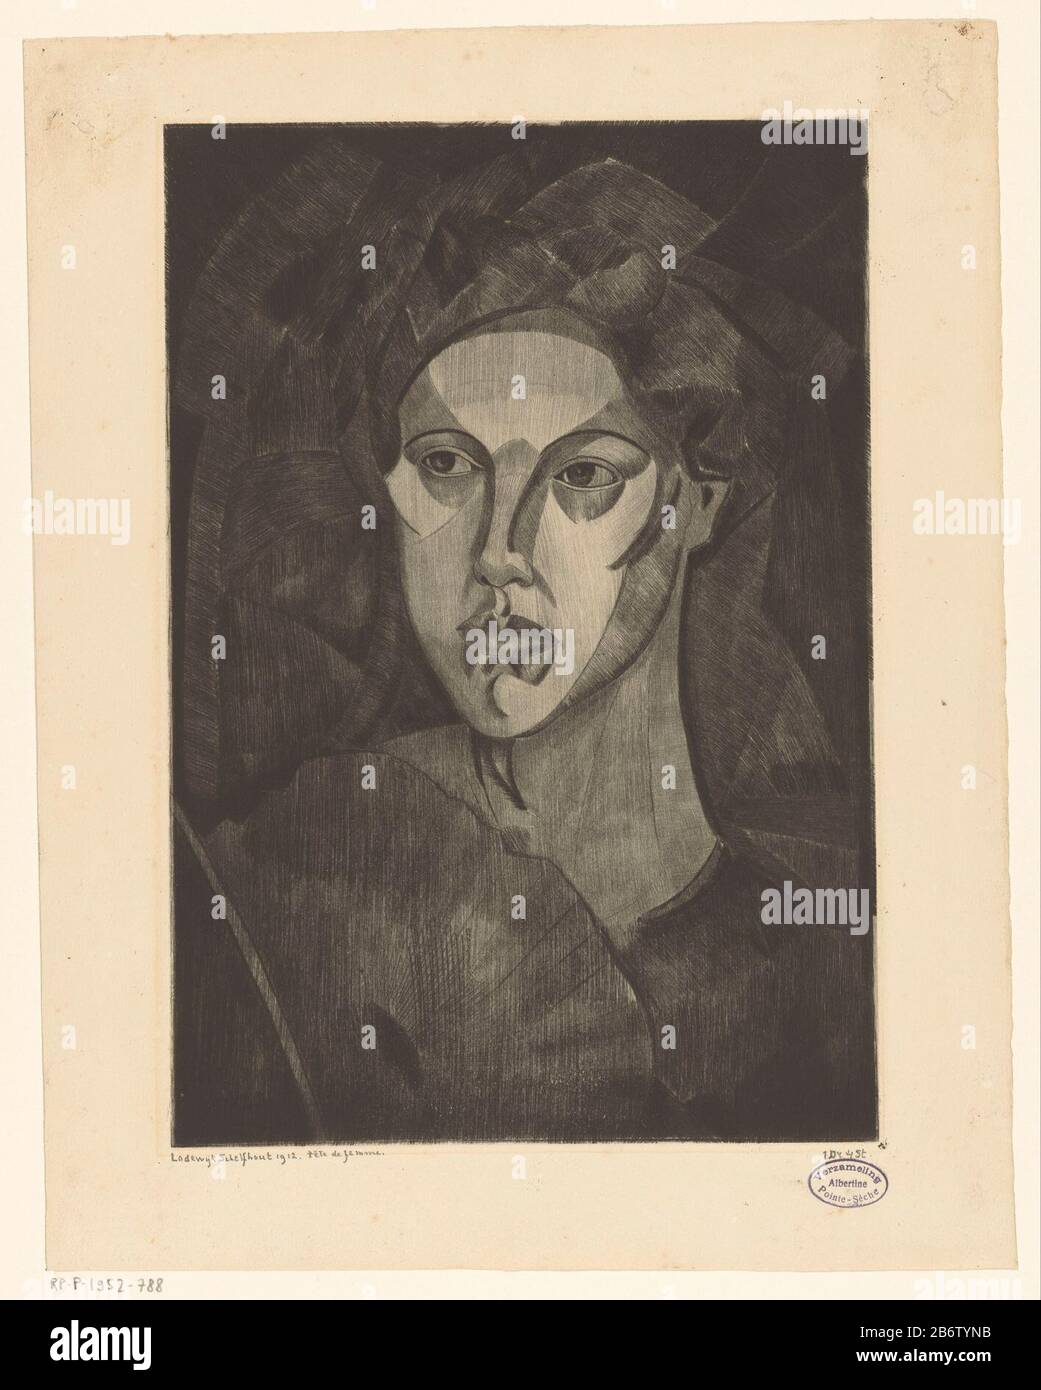 a woman with a waaier. Manufacturer : printmaker Lodewijk Schelfhout (personally signed) printer: DelâtrePlaats manufacture: Paris Date: 1912 Physical features: drypoint on zinc material: paper Technique : drypoint dimensions: plate edge: h 333 mm × W 232 mm Subject: head (human) - AA - female human rights and figurefan Stock Photo